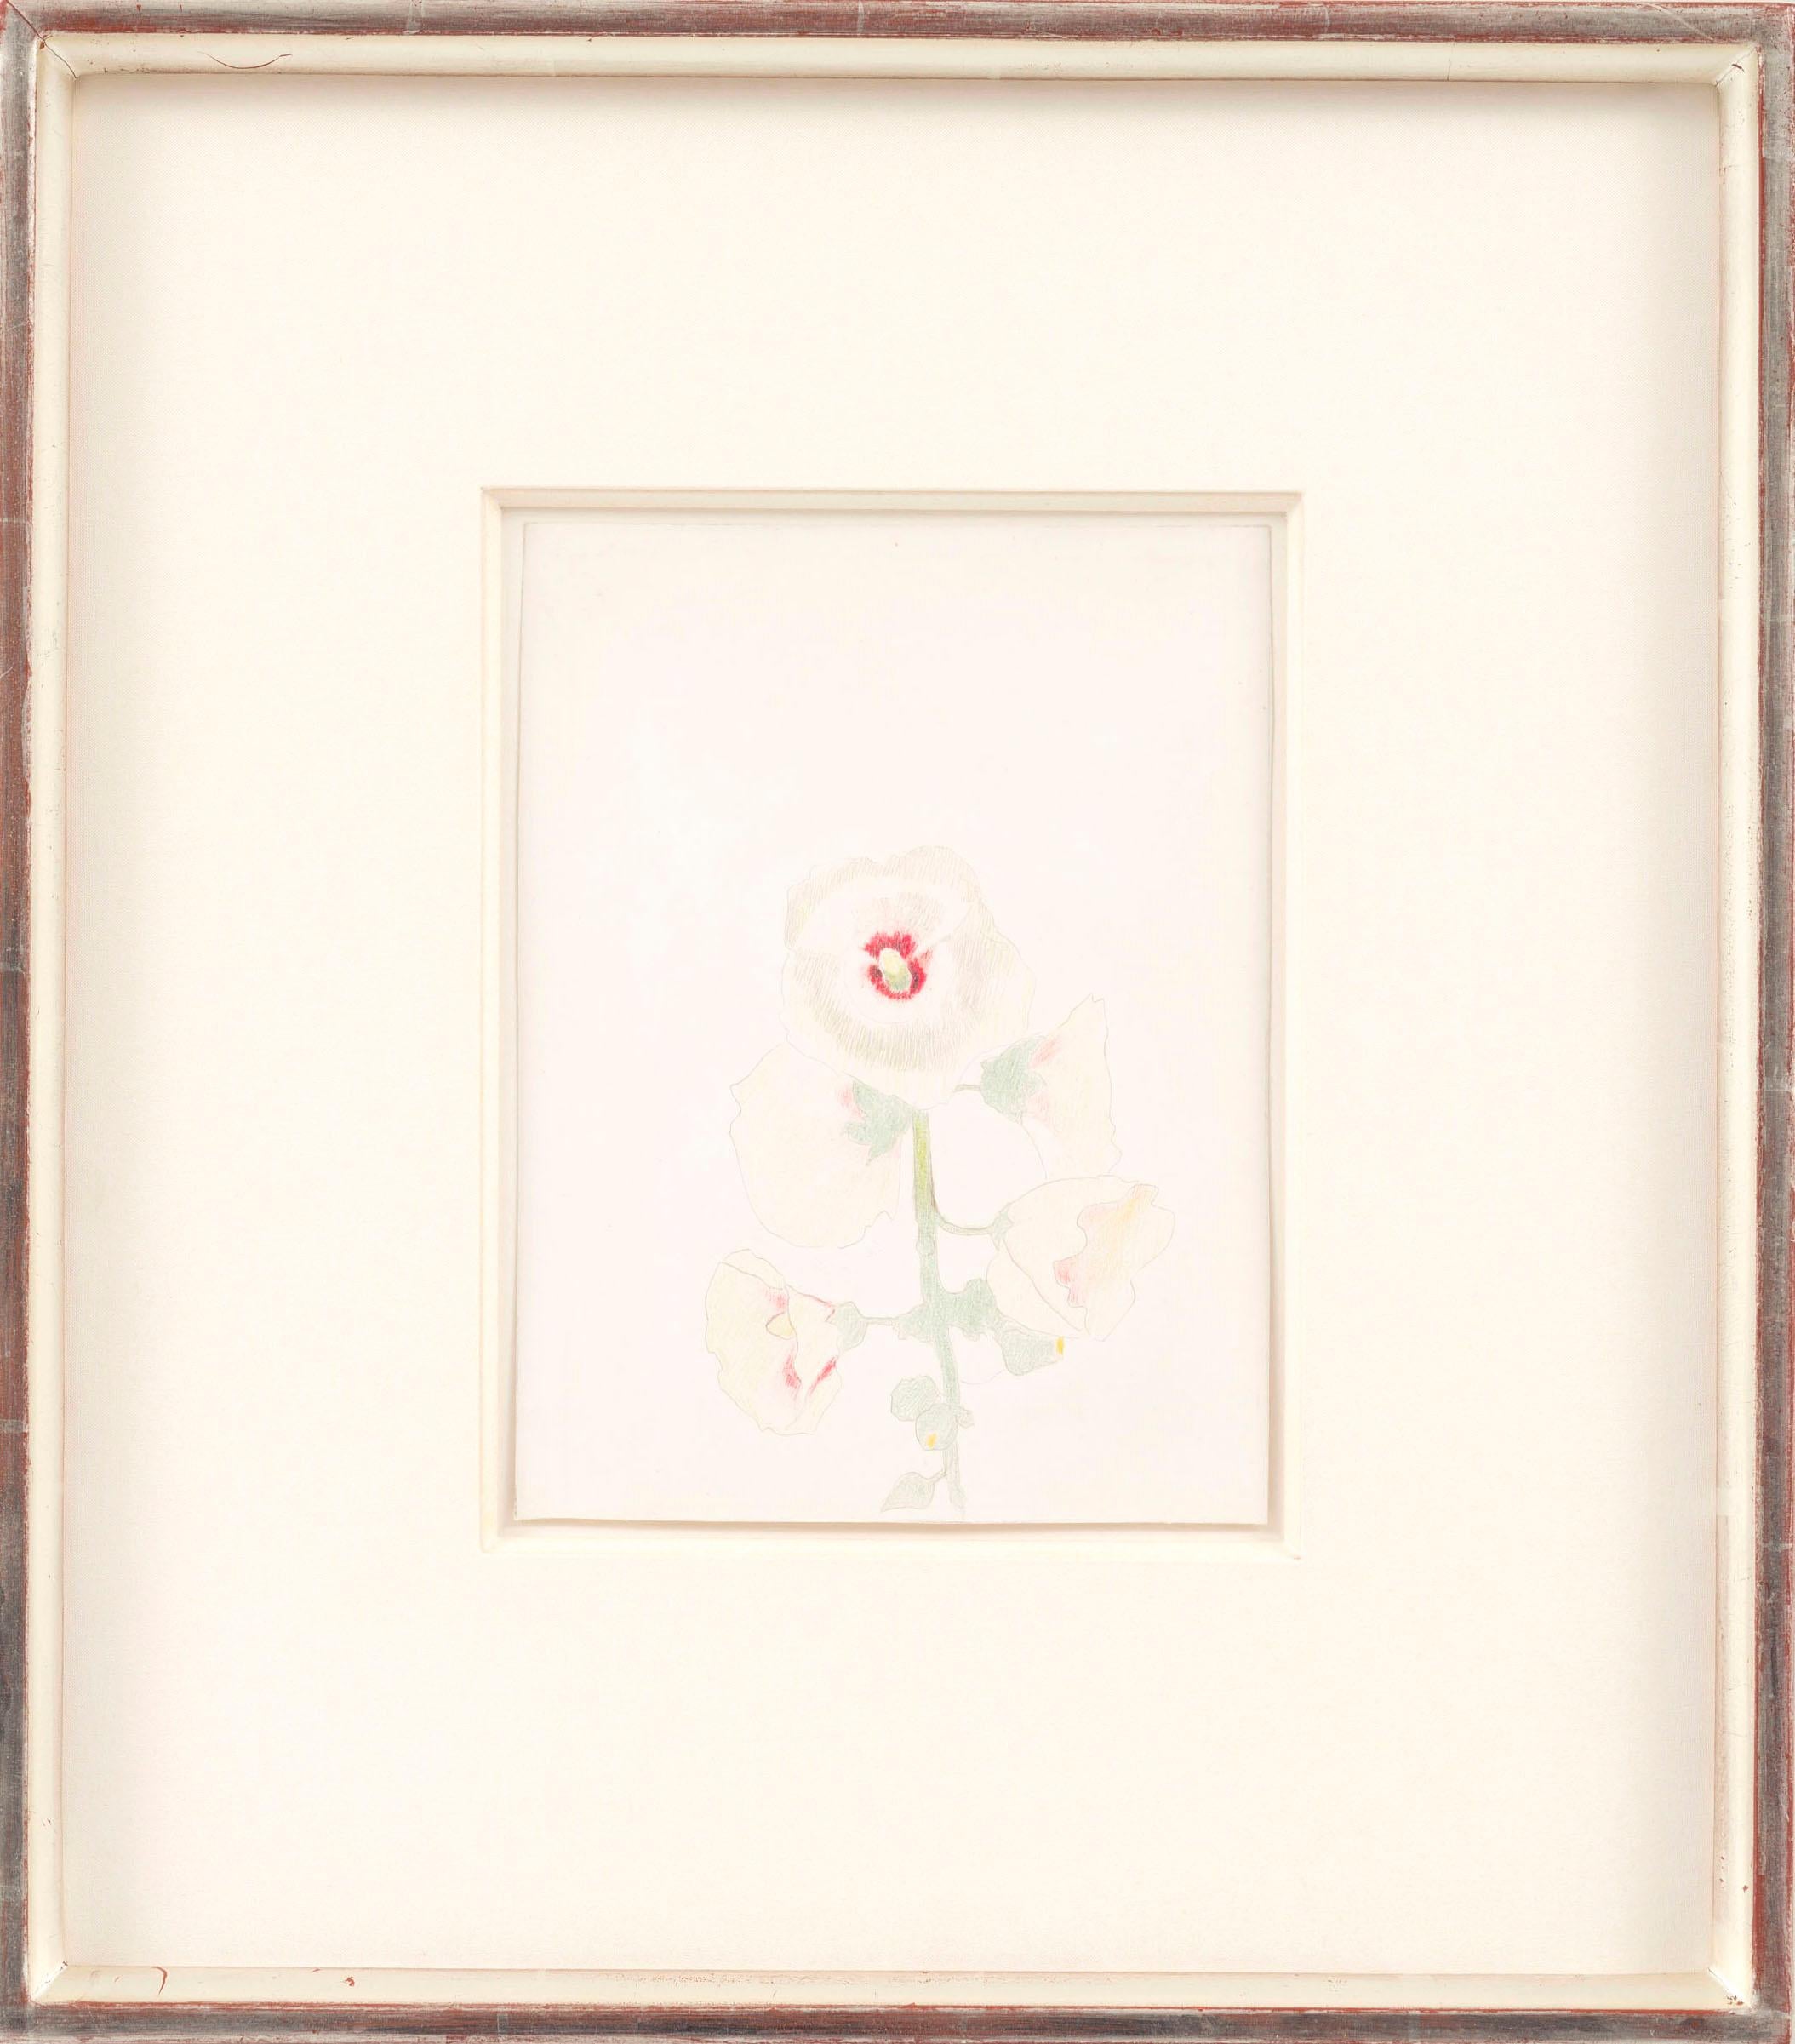 Joseph Stella
Hollyhocks, c. 1919
silverpoint and crayon on paper
15 x 12.1 cm

Provenance:
the artist;
by bequest to his nephew, Sergio Stella;
- 2000 Mary Stella

Exhibited:
Richard York Gallery, New York, 1998, Passion and Reverence: Joseph